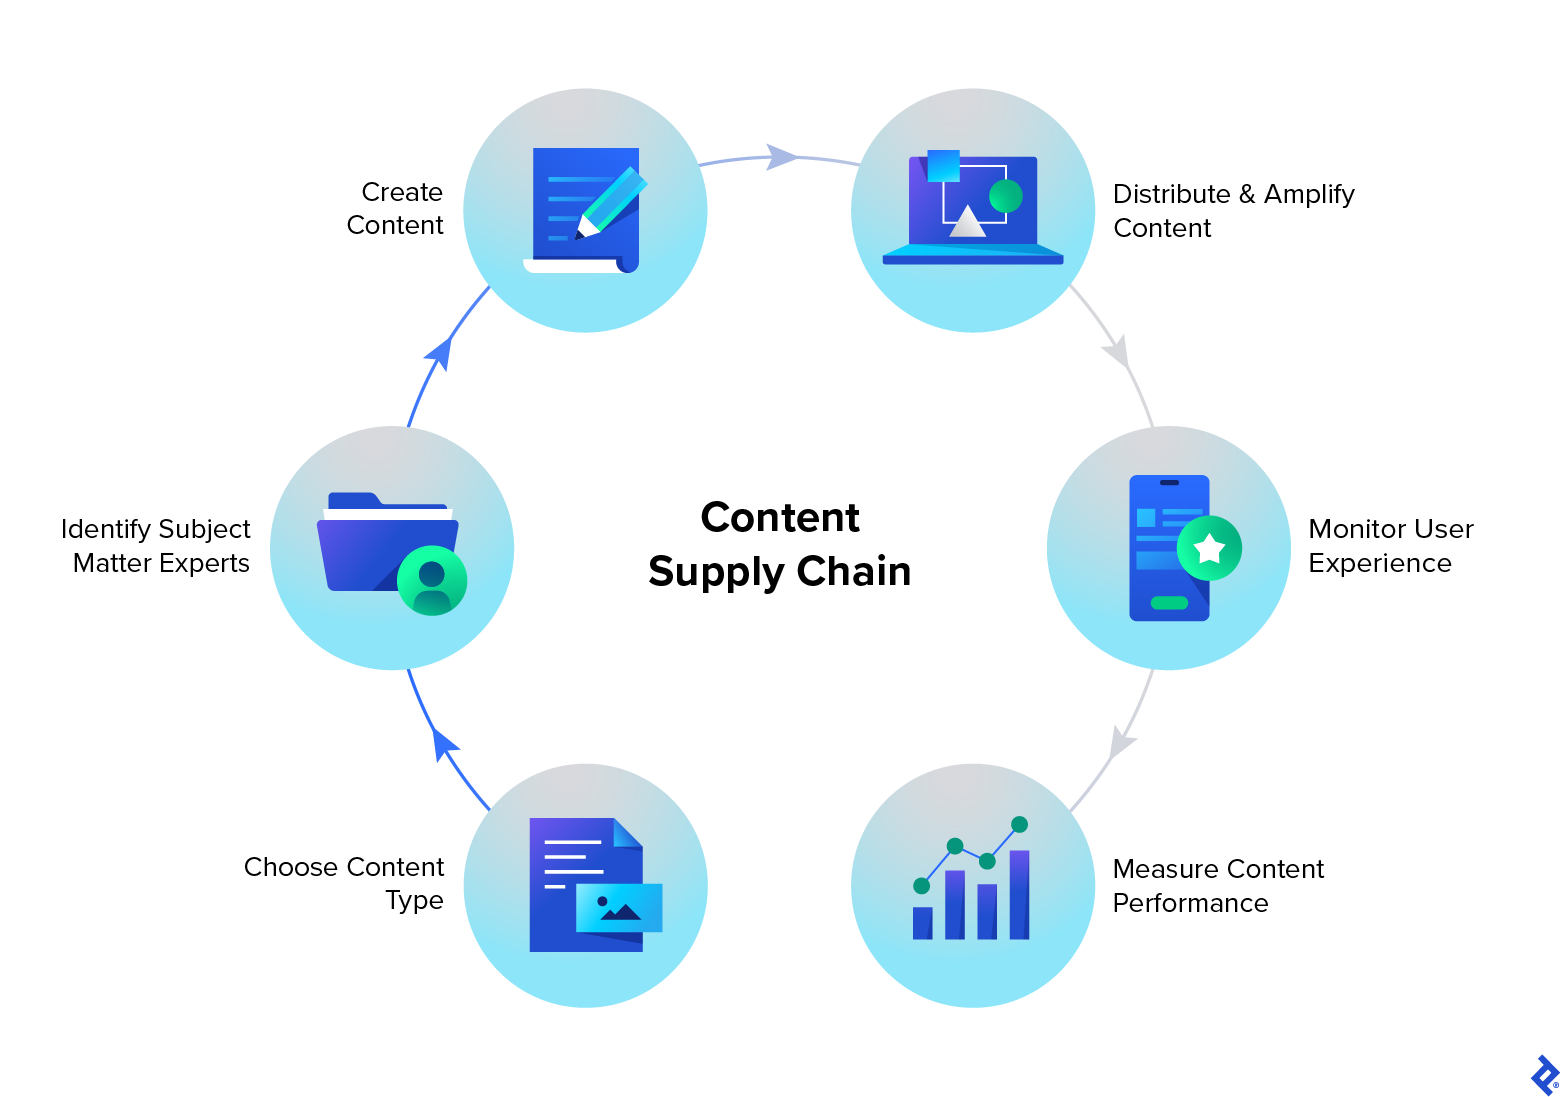 A diagram displays the six stages of a content supply chain: Choose Content Type, Identify Subject Matter Experts, Create Content, Distribute &amp; Amplify Content, Monitor User Experience, and Measure Content Performance.